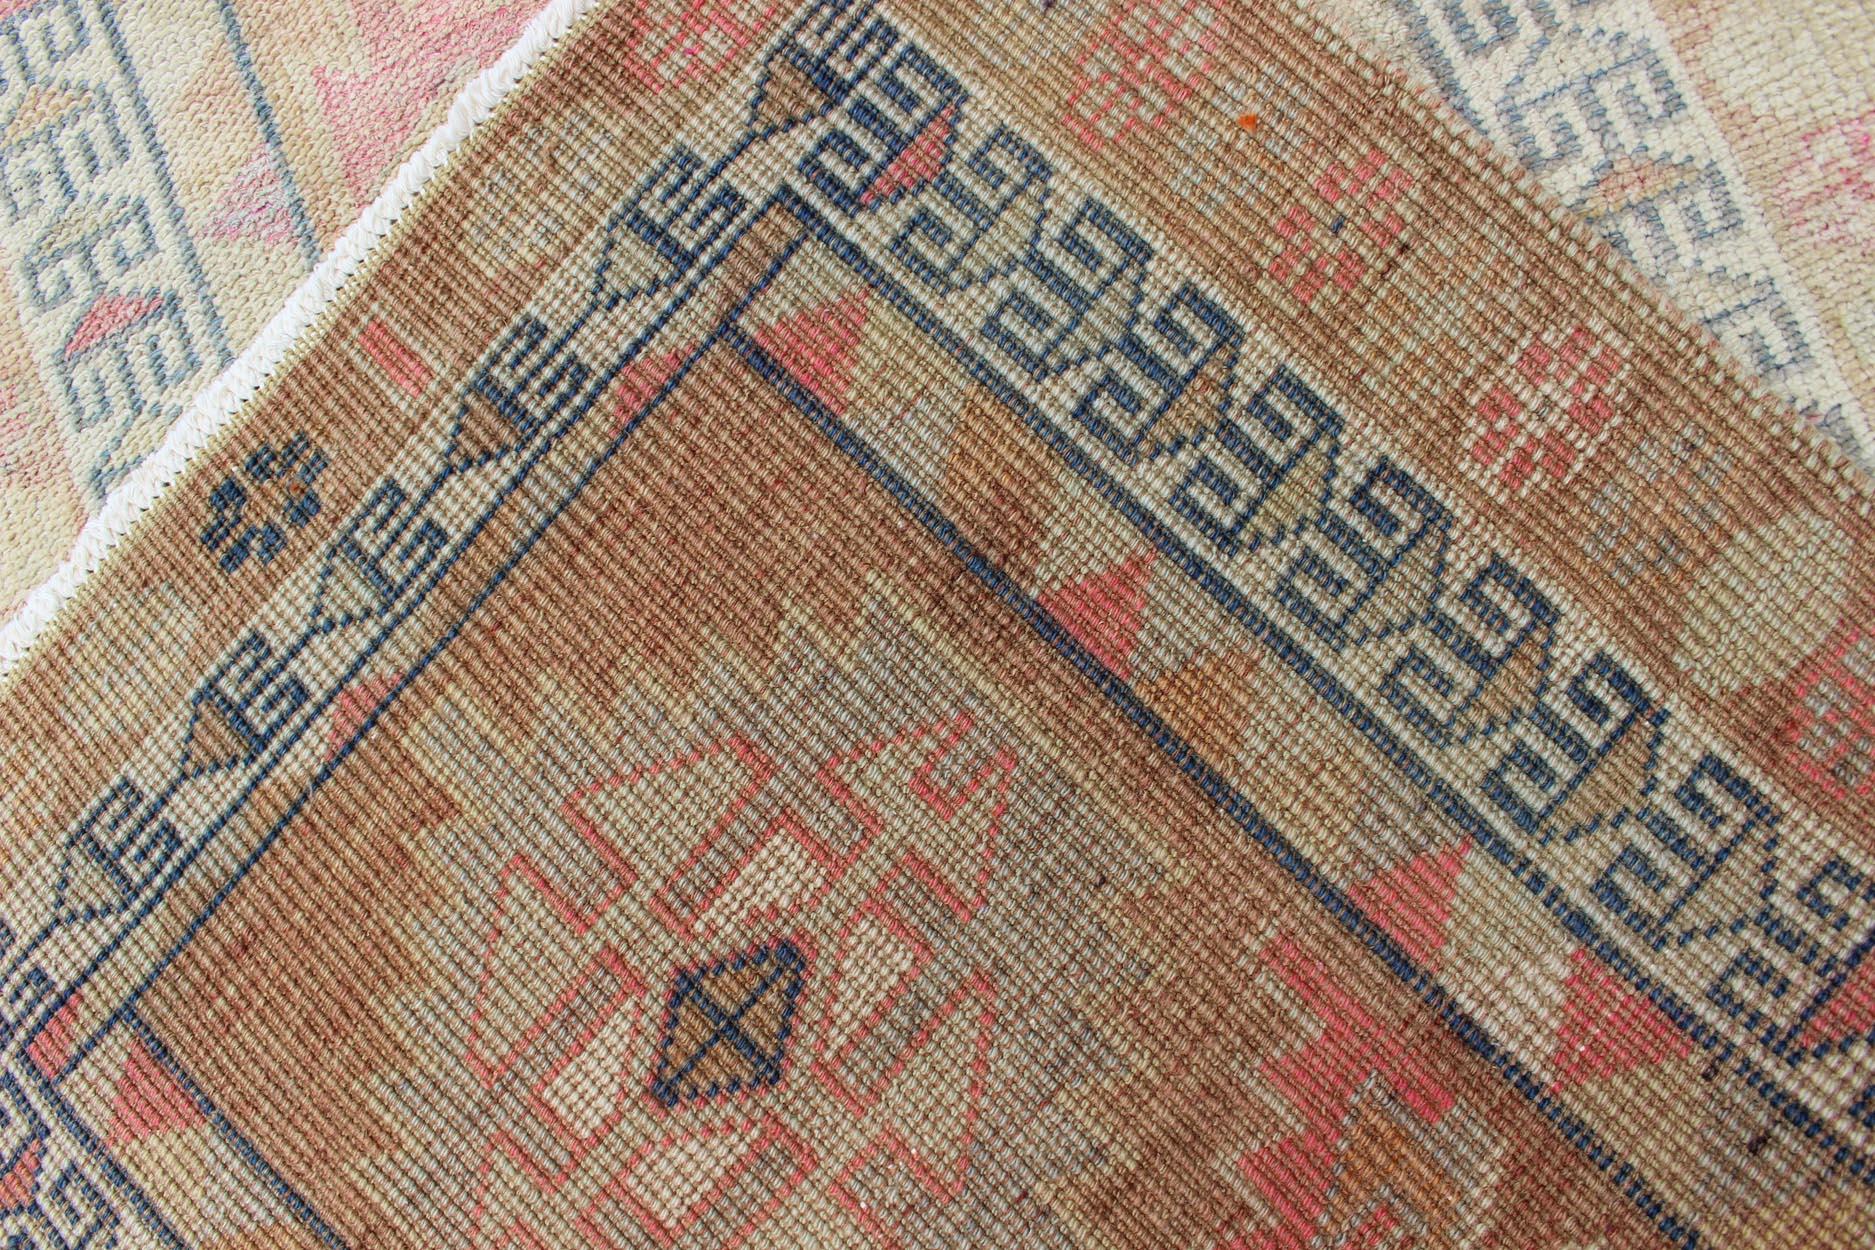 Tribal Design Vintage Turkish Runner in Light Pink, Sapphire Blue & Muted Tones For Sale 2